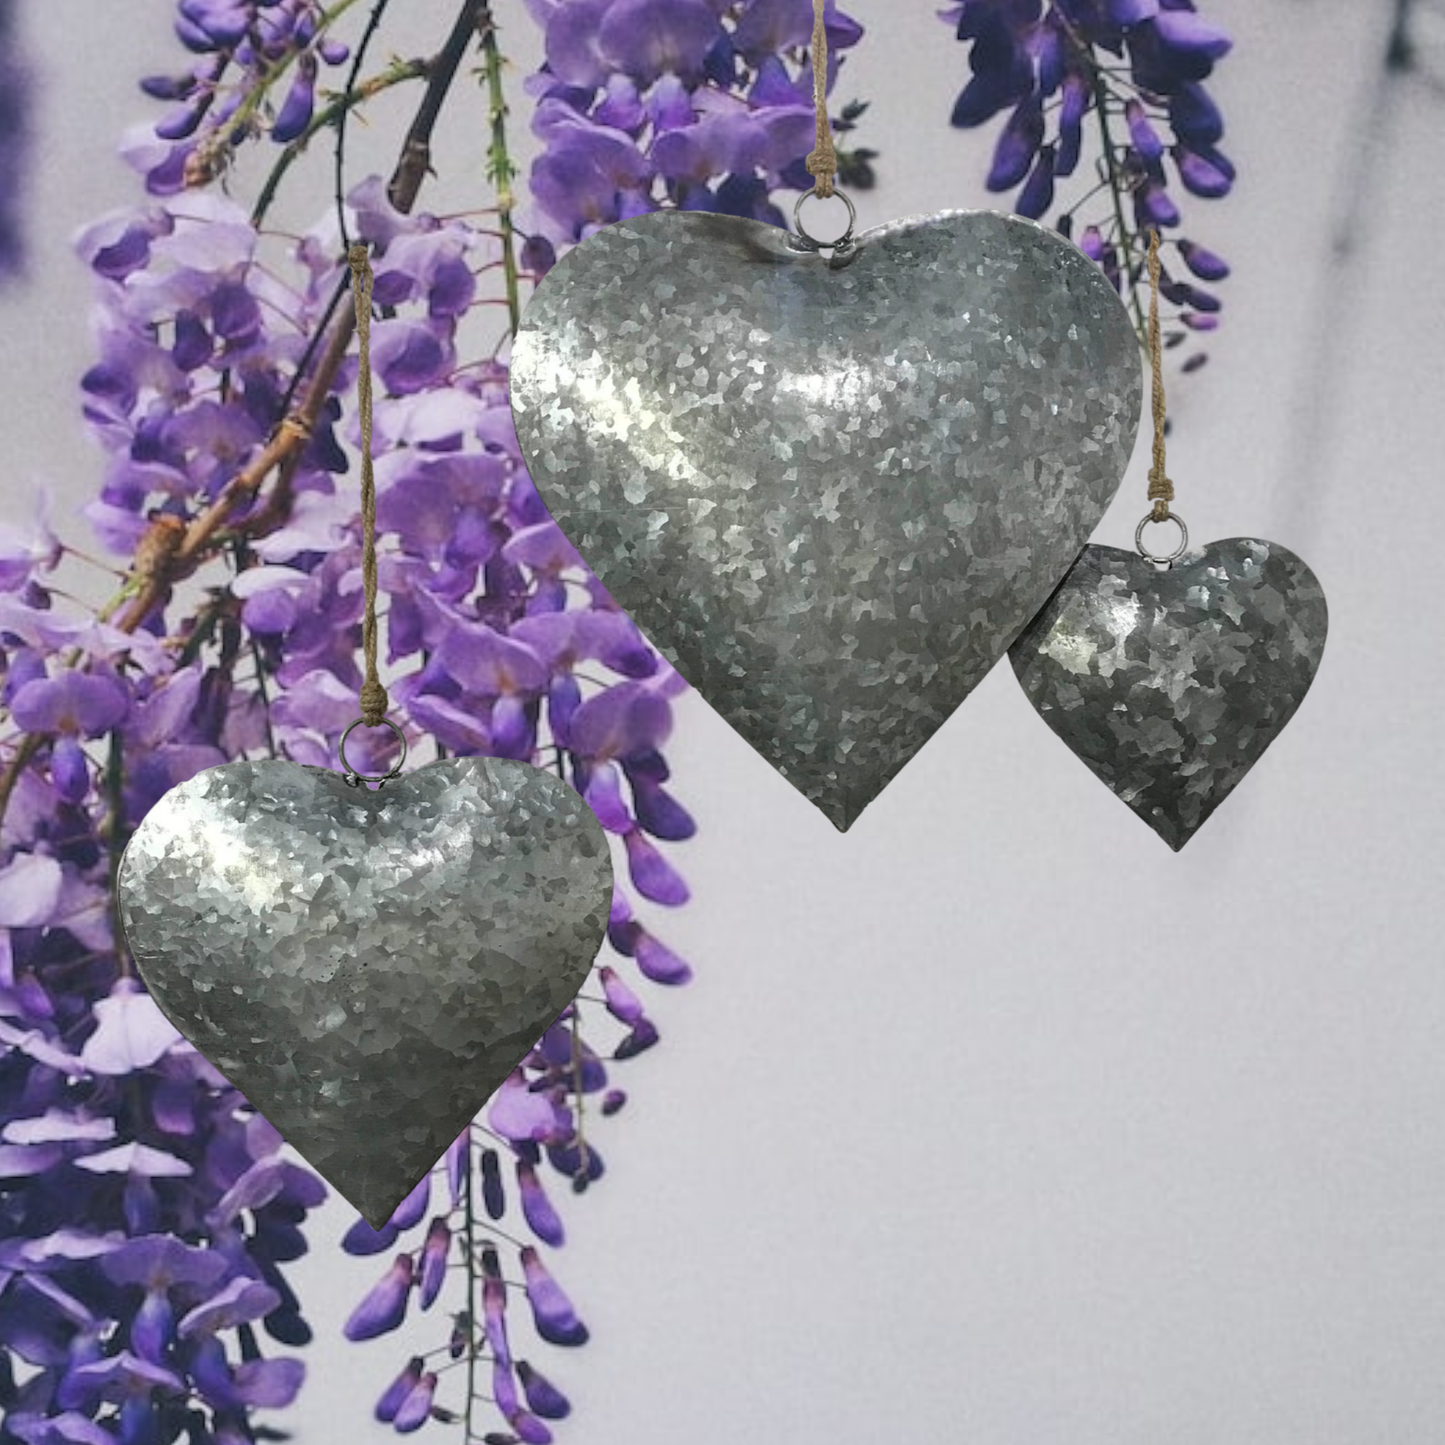 Metal 3-D Hanging Hearts Ornaments W/O Ribbon: Burnished Gold